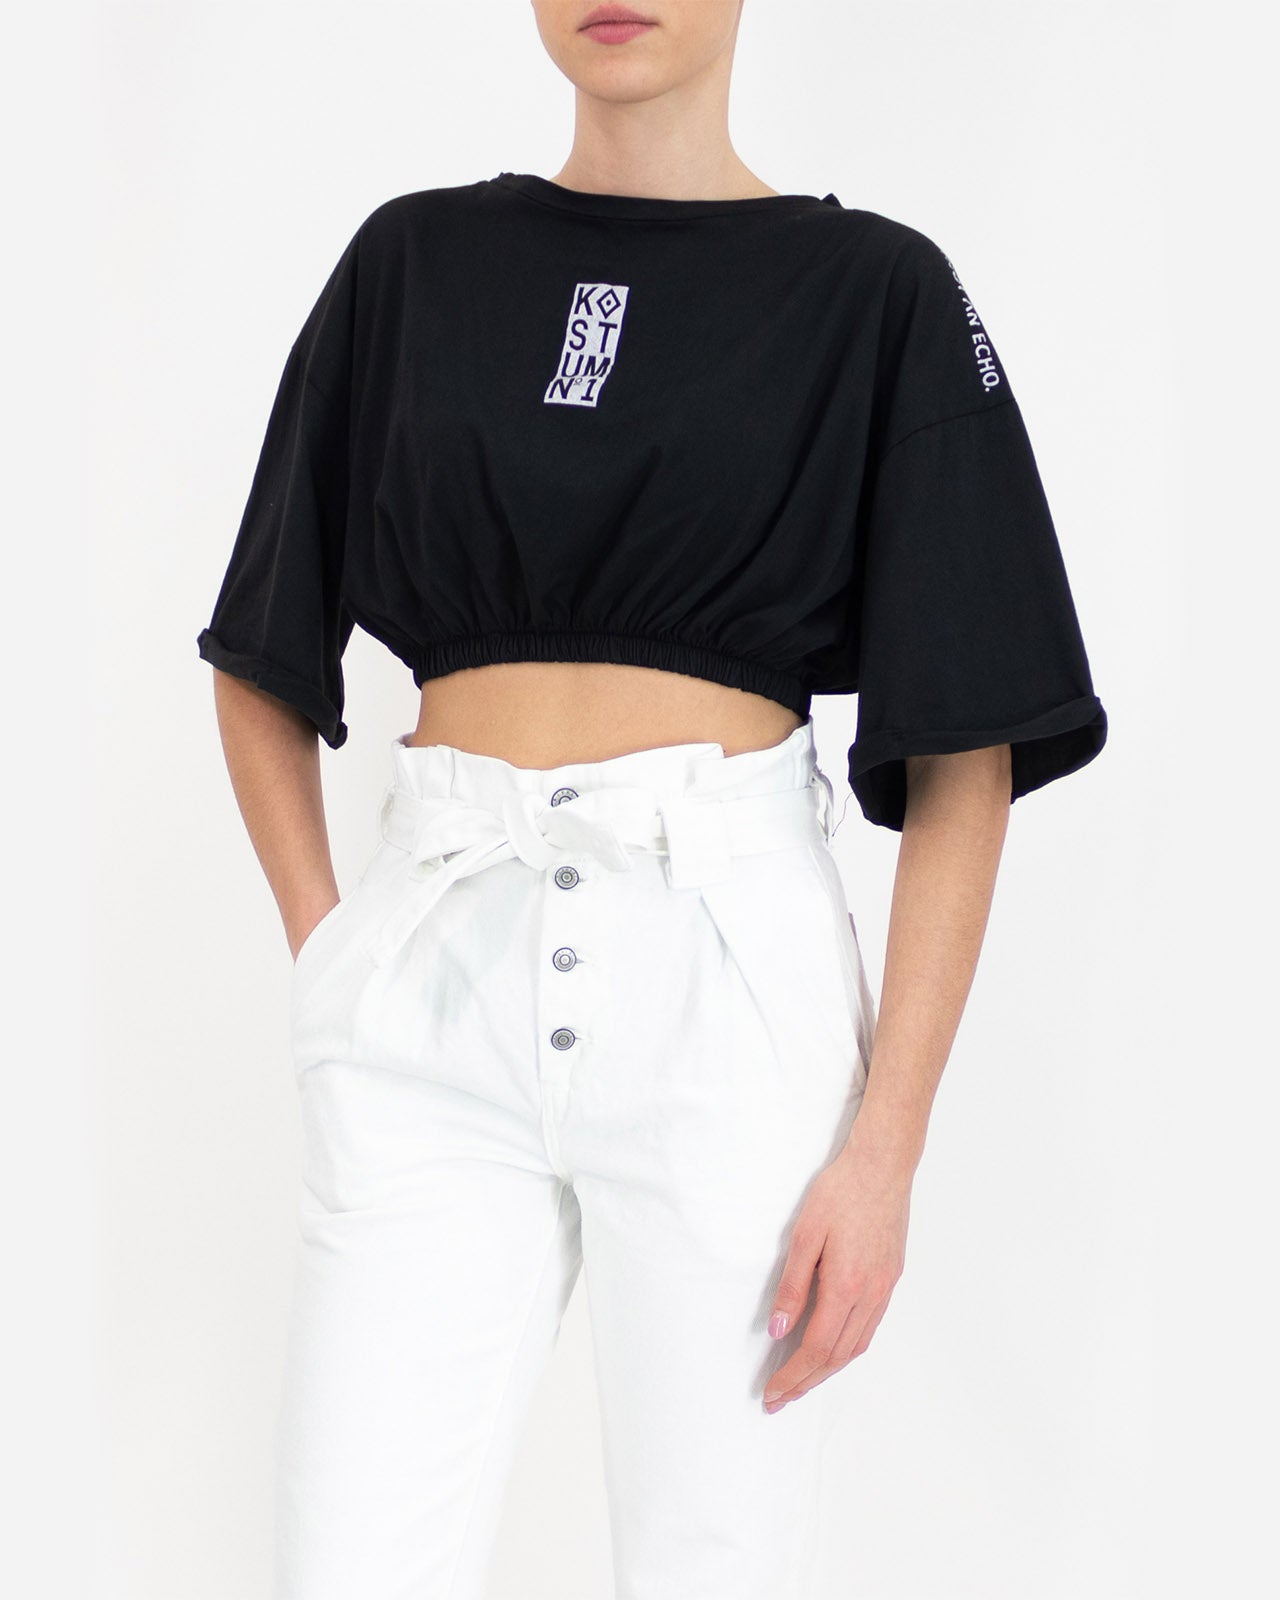 Cropped over t-shirt